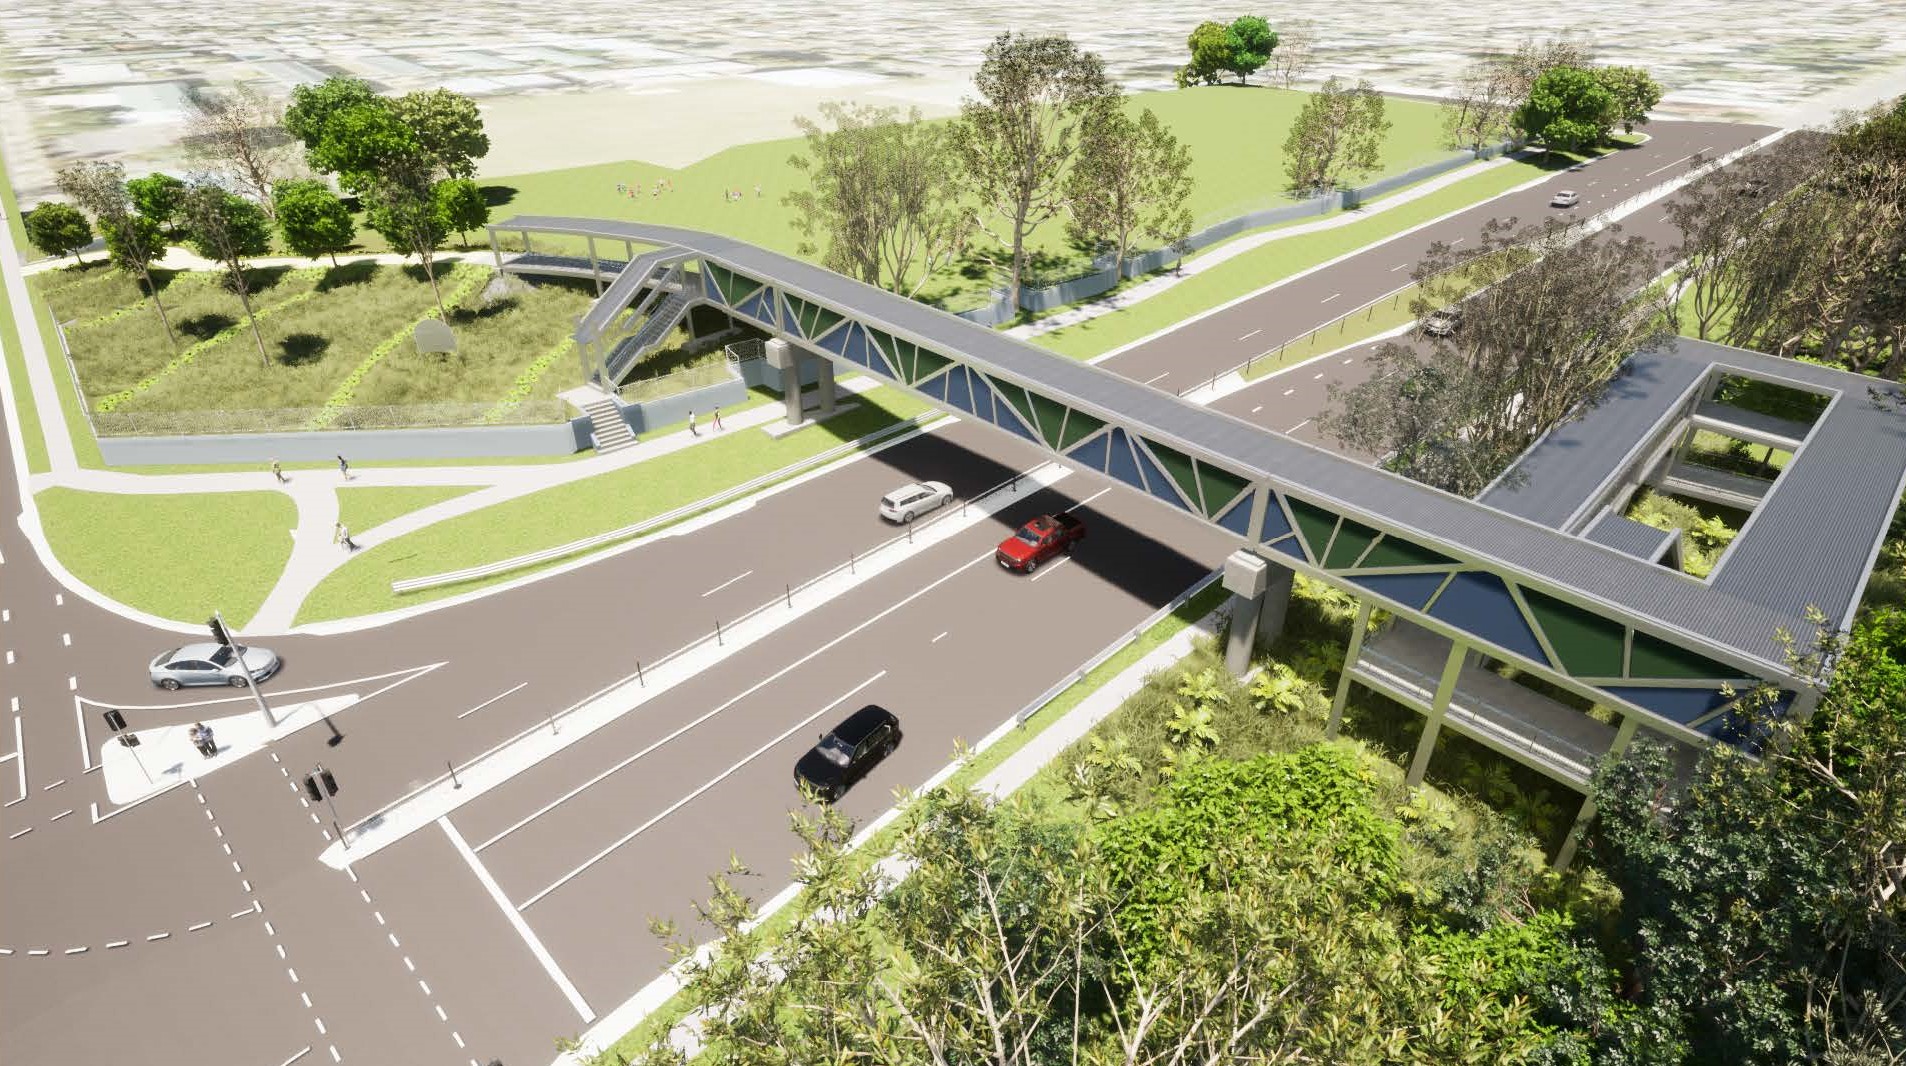 Artist impression of aerial view of pedestrian overpass from northwestern position showing overpass, ramps, stairs, pedestrian fencing and paths